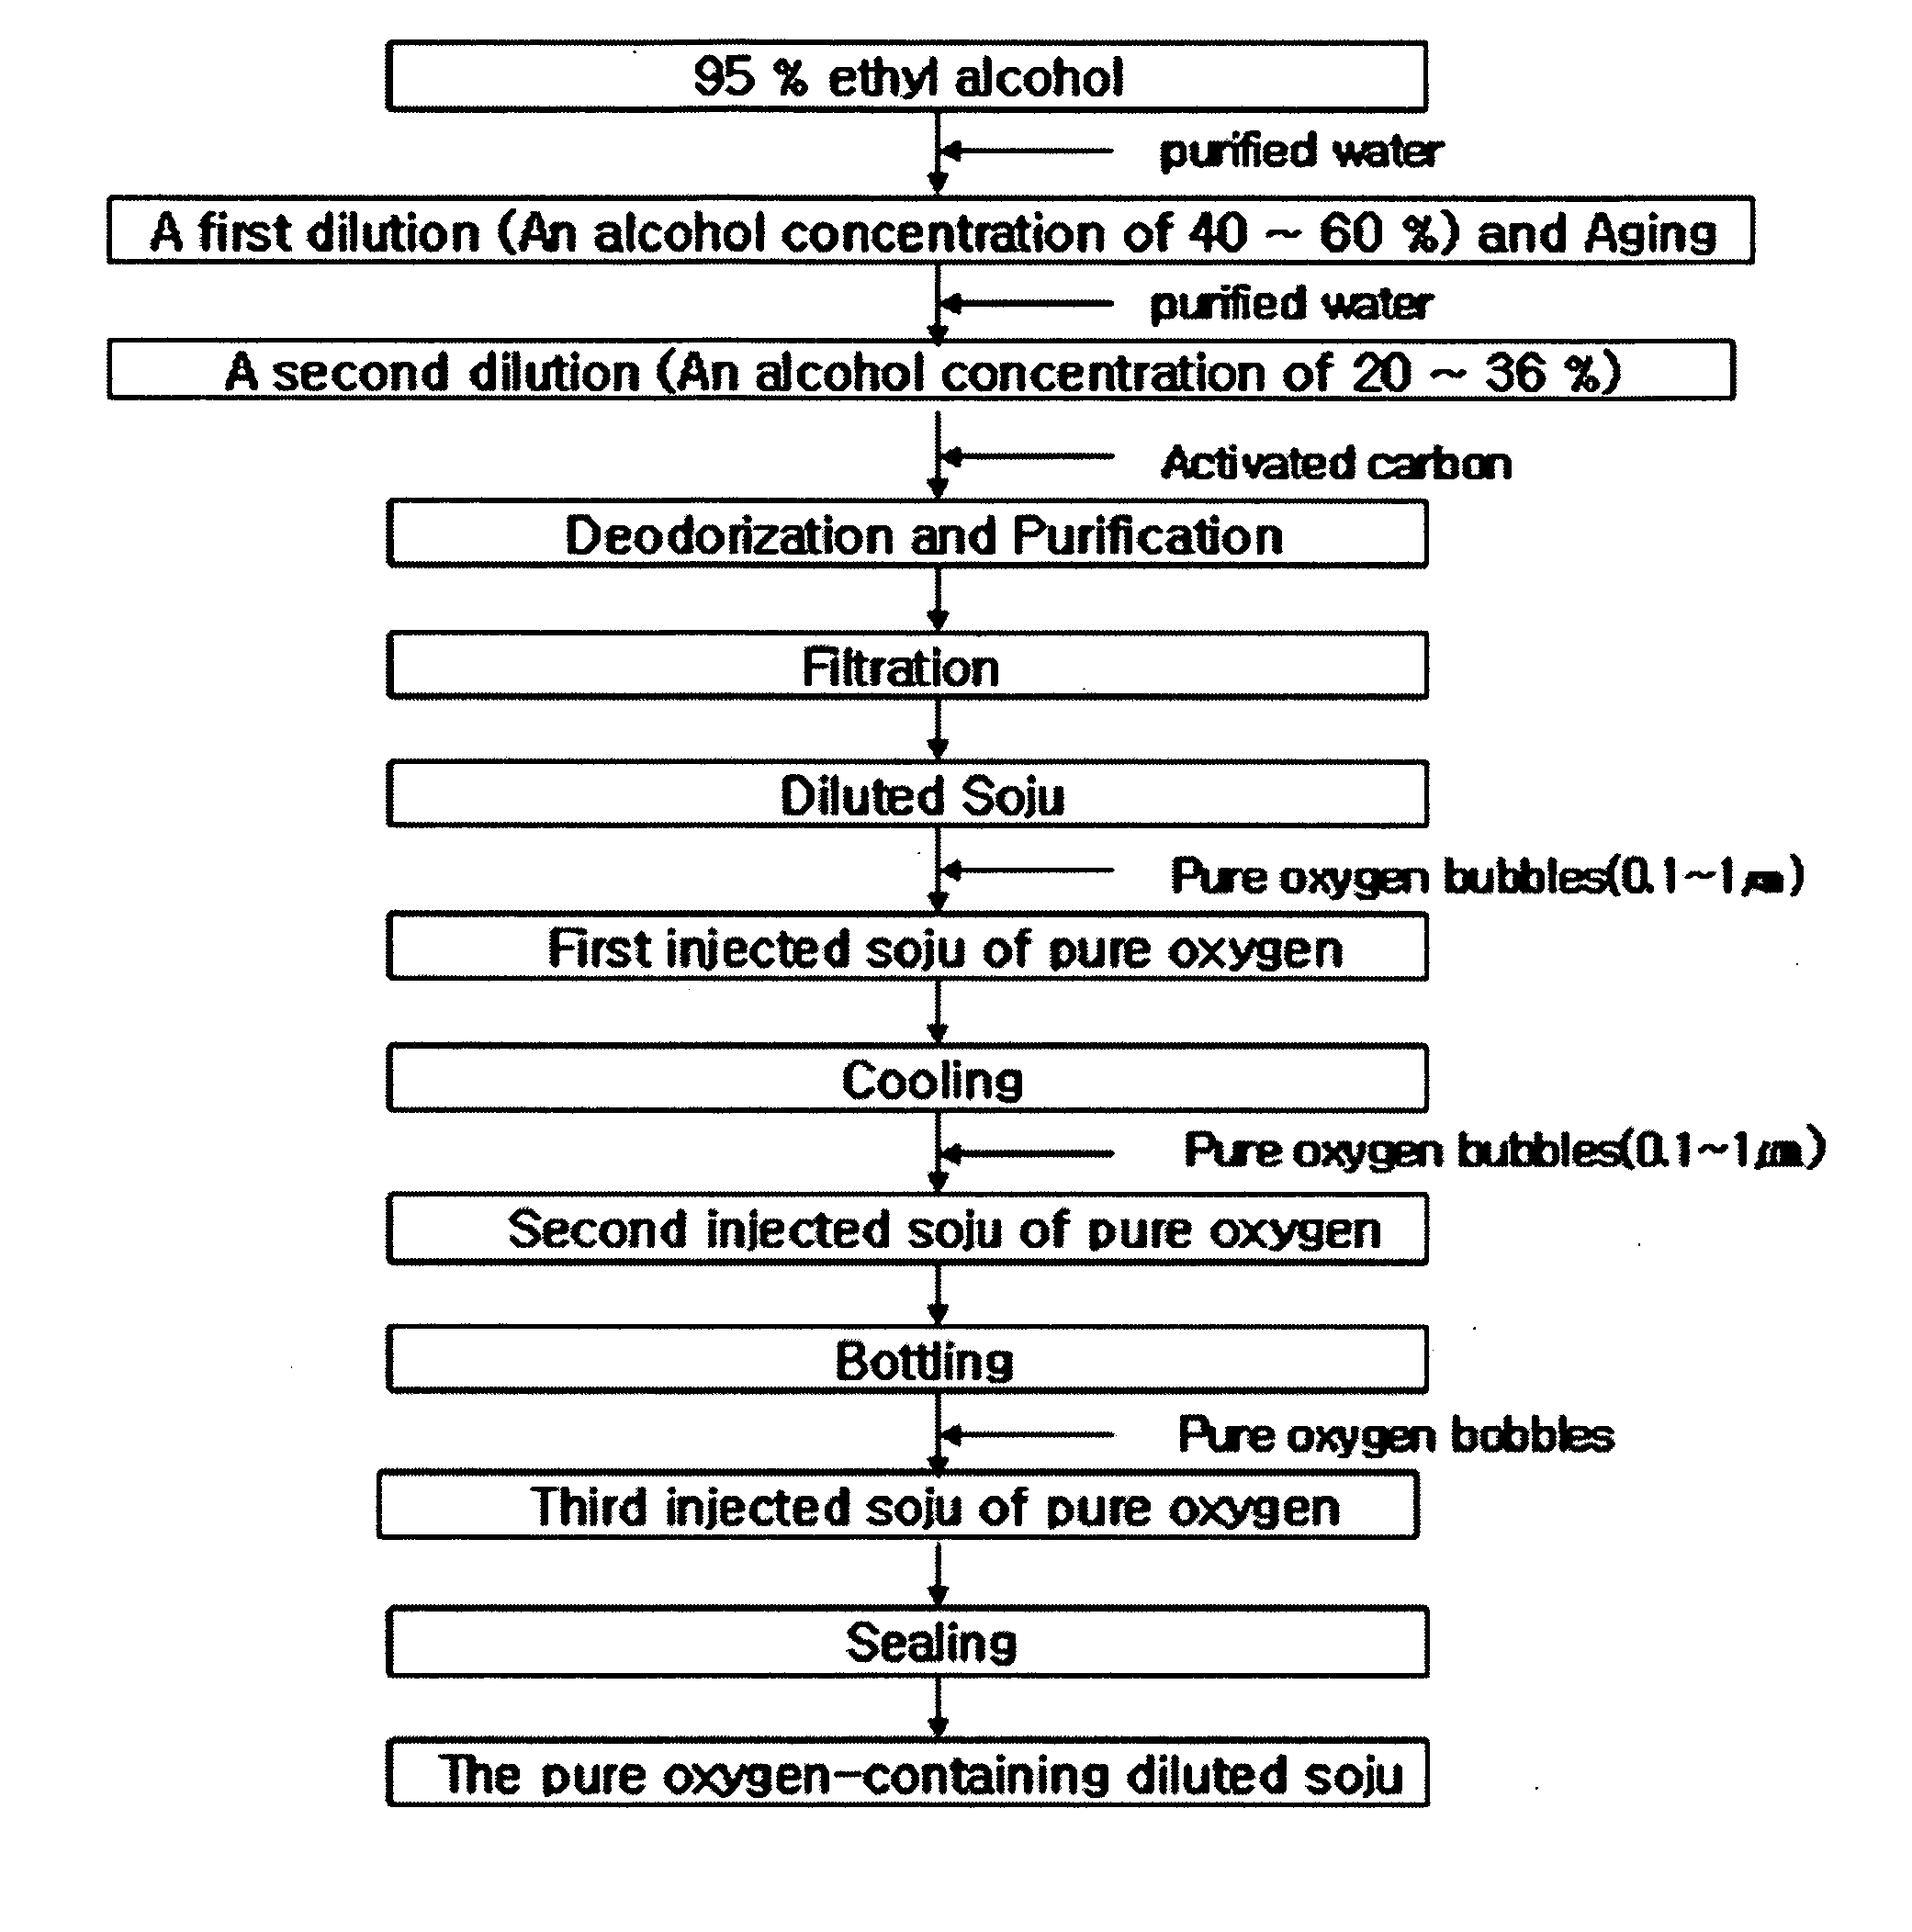 Method for manufacturing pure oxygen-containing diluted soju